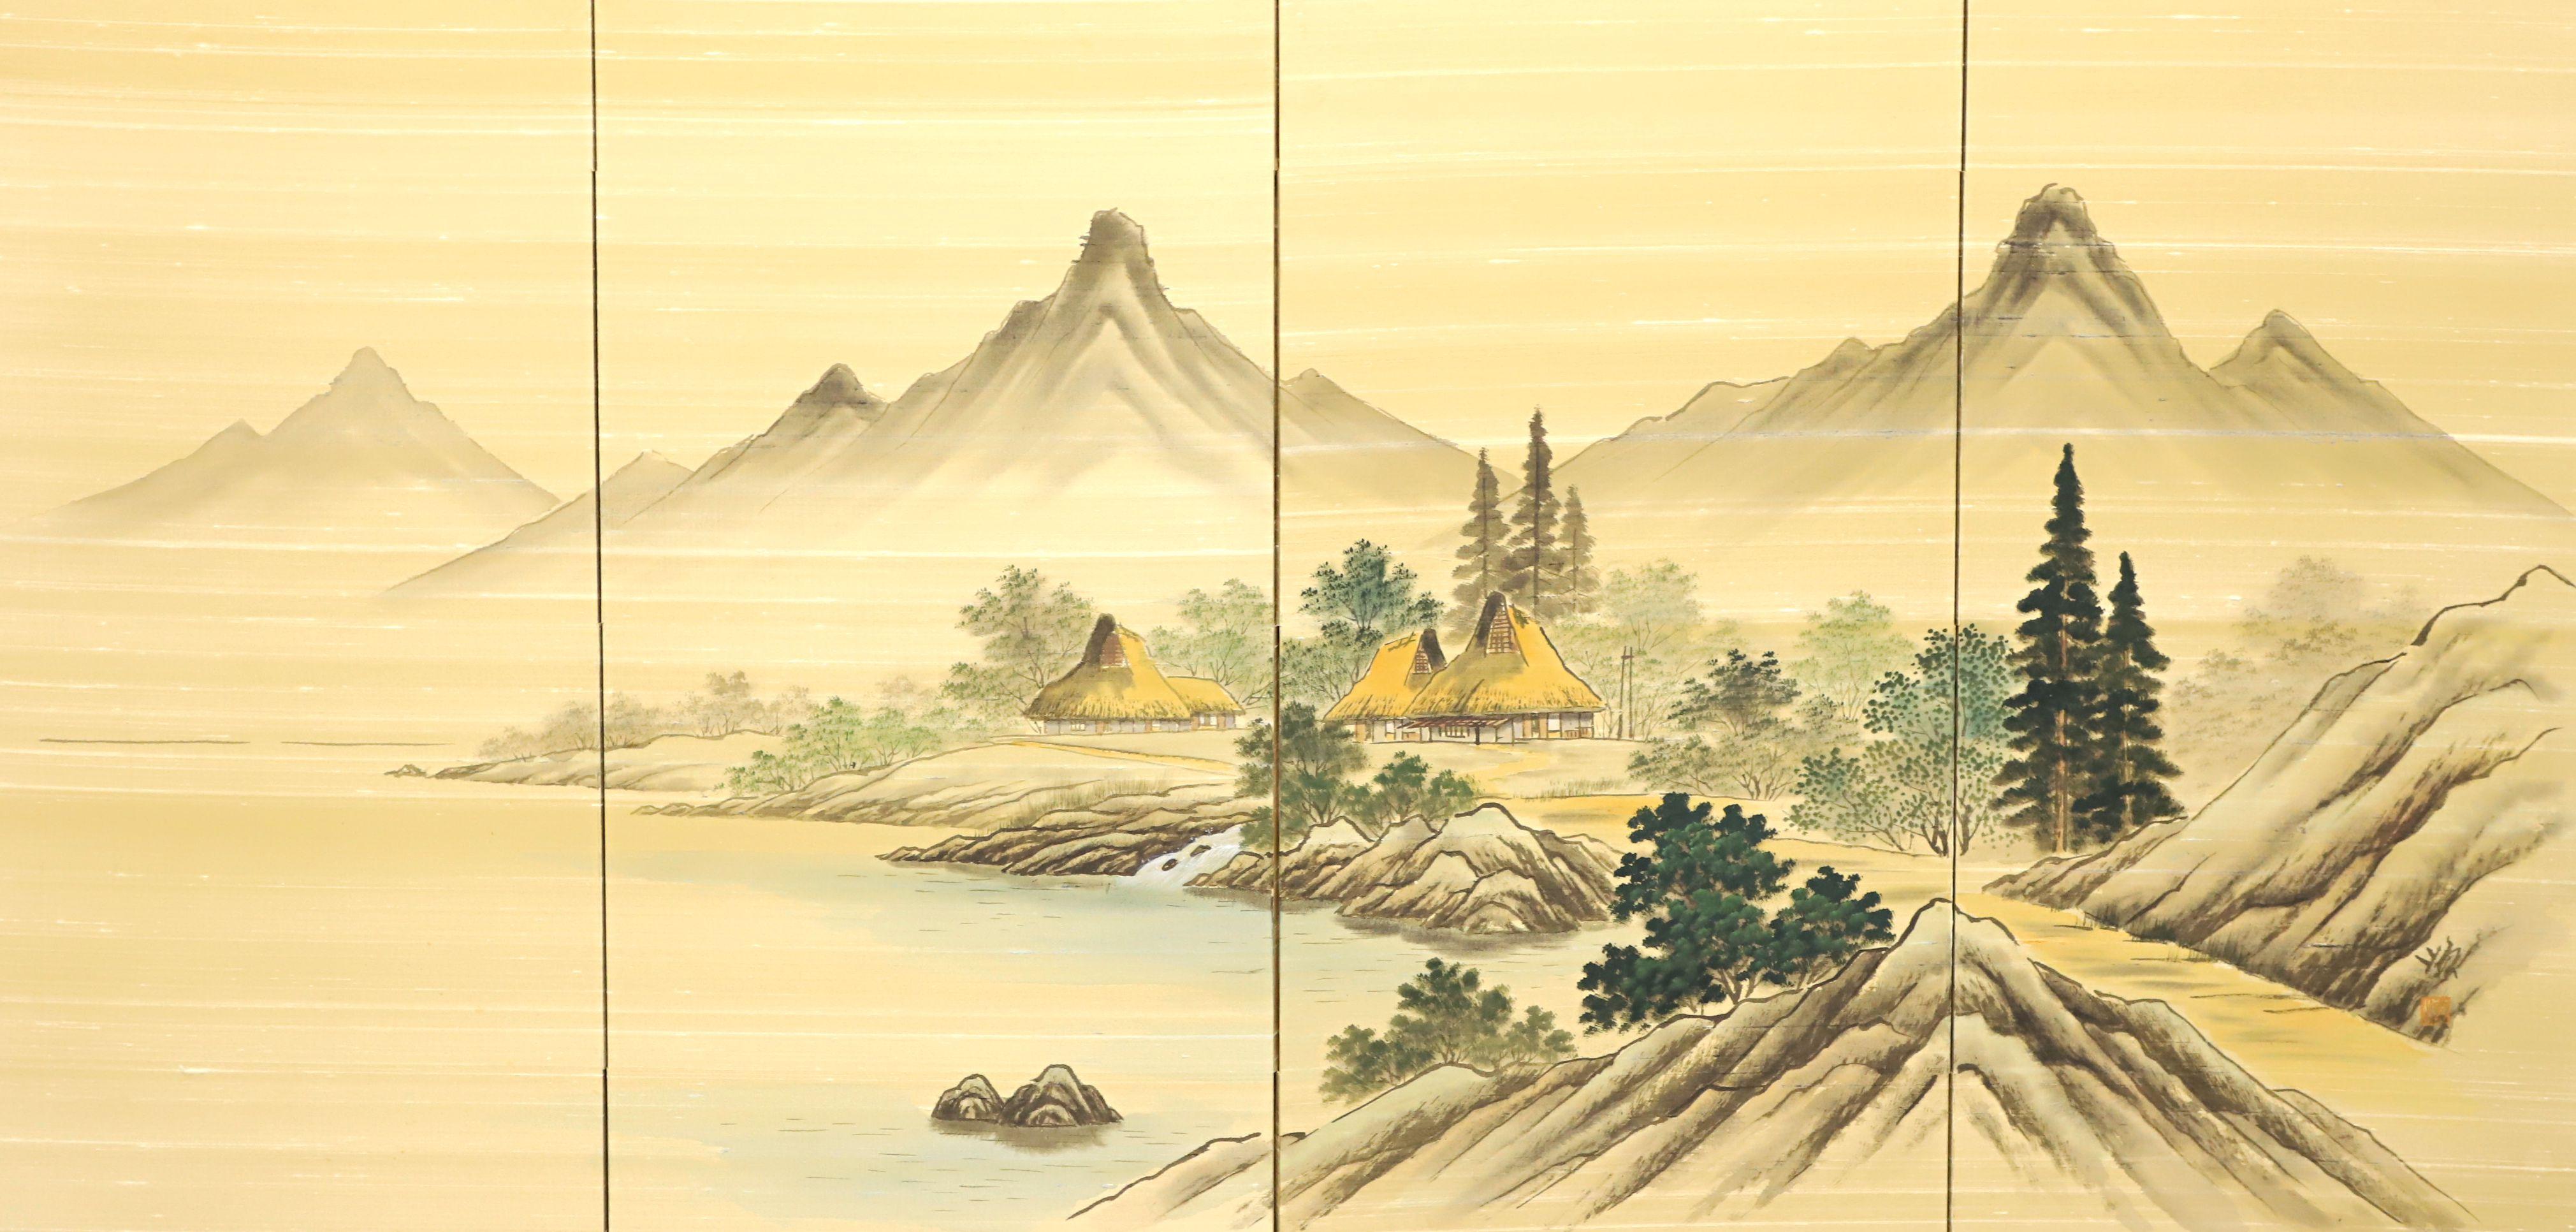 An Asian Japanese four-panel folding screen. Untitled, (Mountain Village on Lake). Unsigned, artist unknown. Hand painted on fabric, possibly silk, then applied to four connected framed fabric panels that creates one scene. Fabric panels are framed